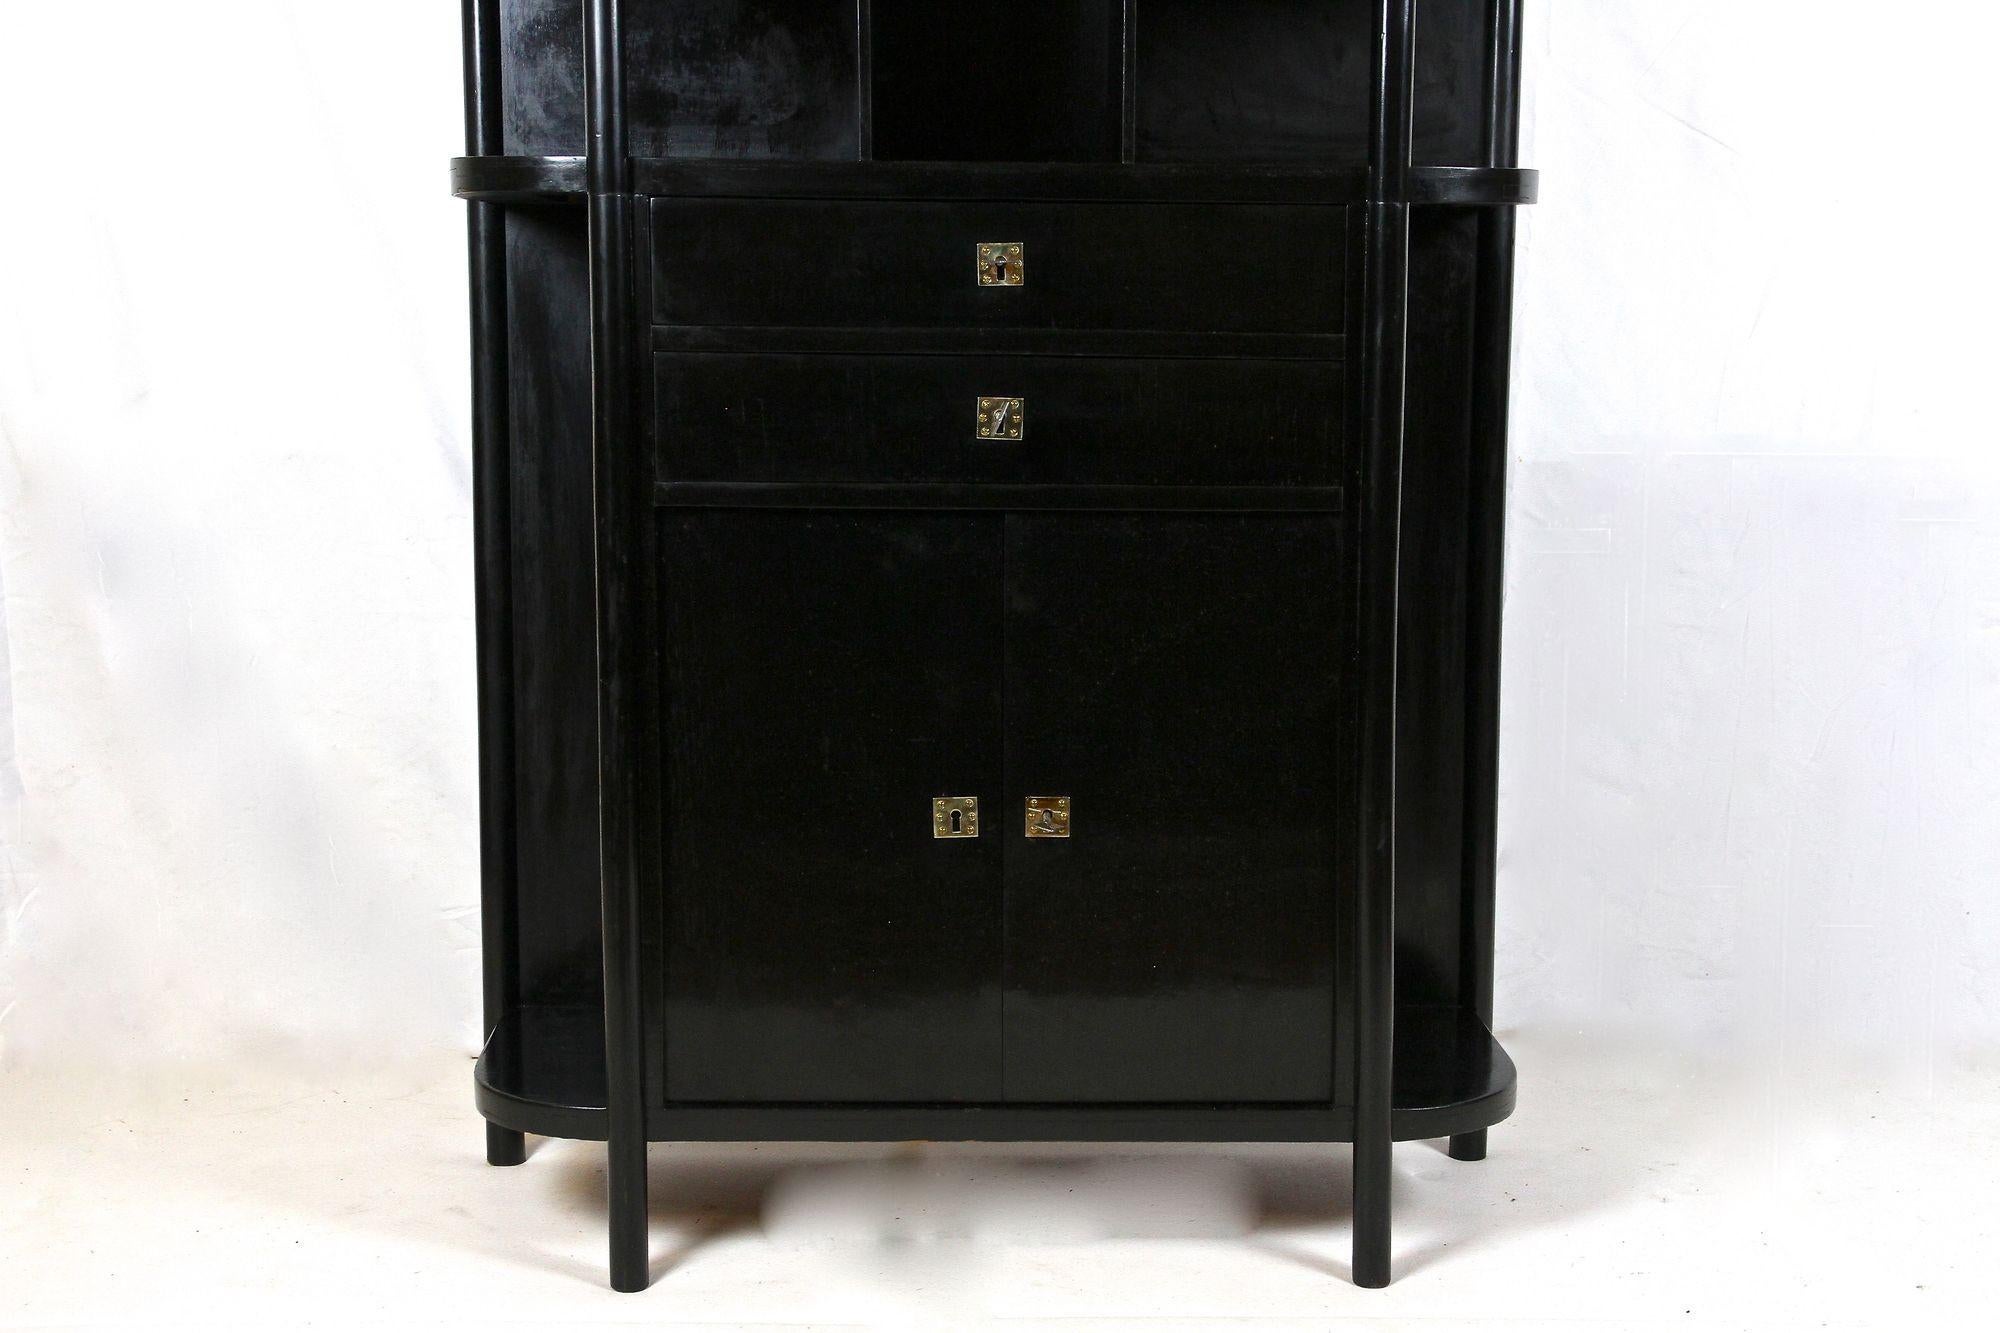 Ebonized Black Art Nouveau Display Cabinet by Josef Hoffmann for Thonet, AT ca. 1905 For Sale